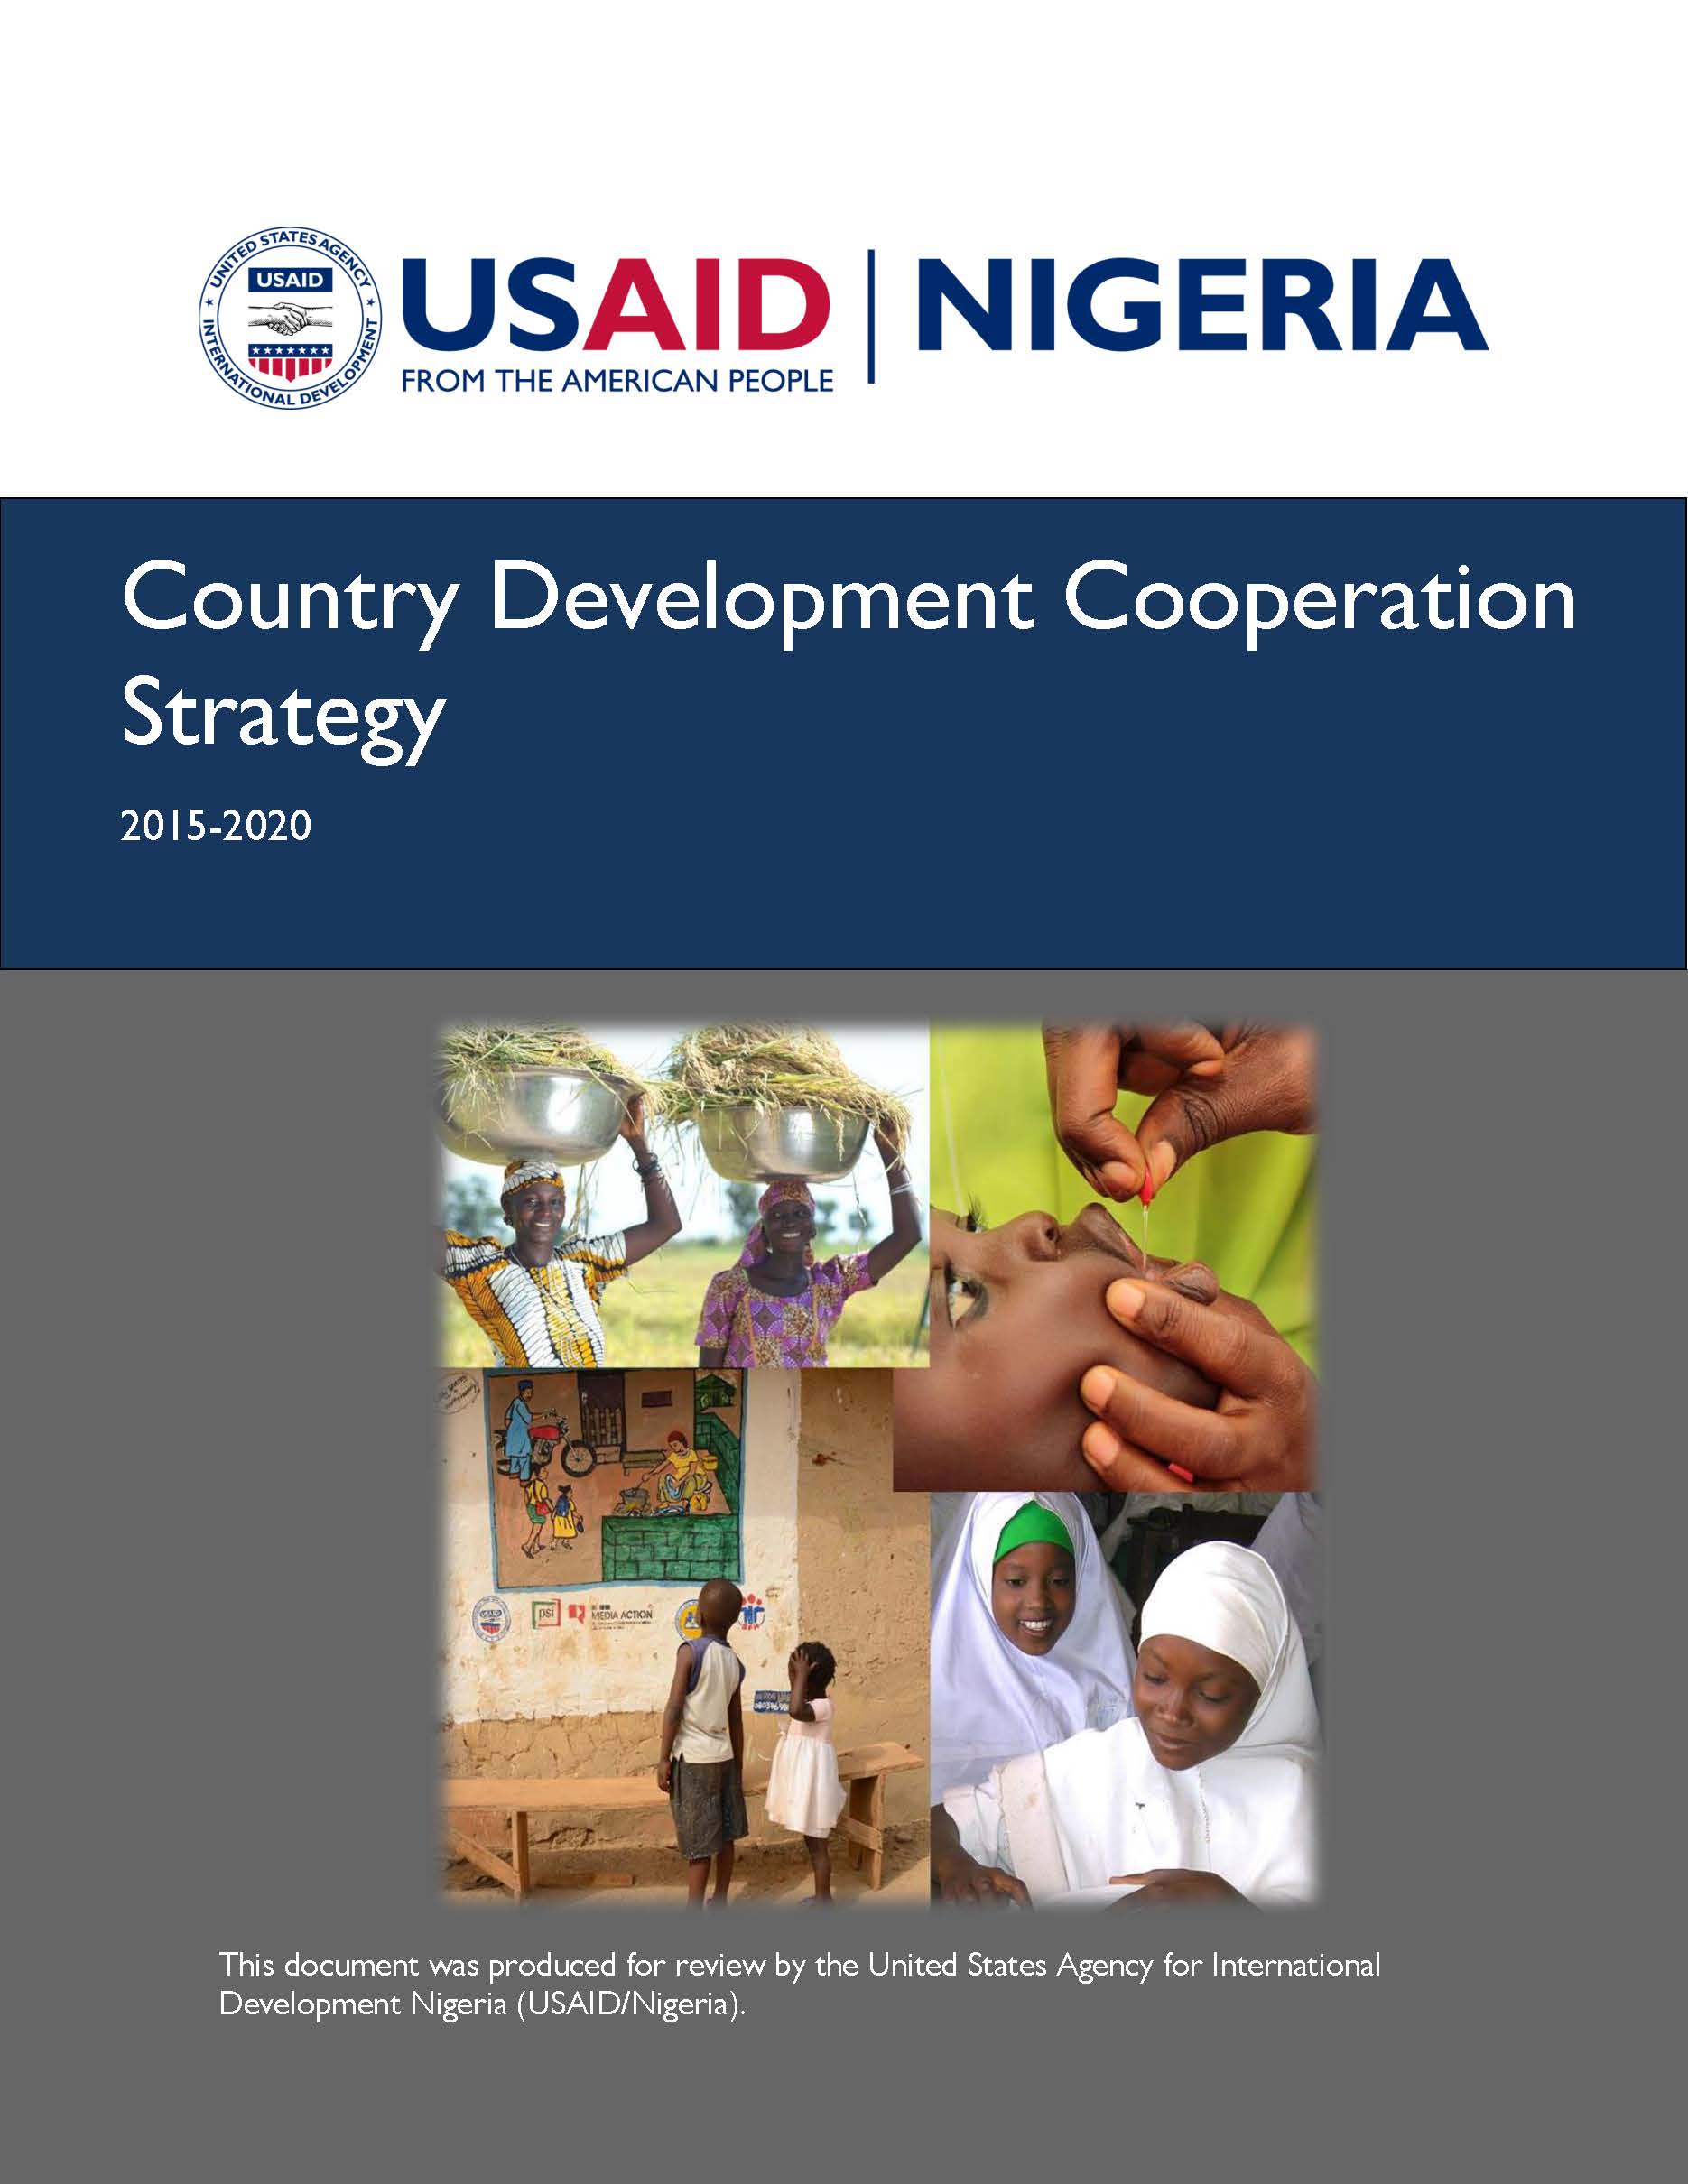 Nigeria Country Development Cooperation Strategy 2015-2020